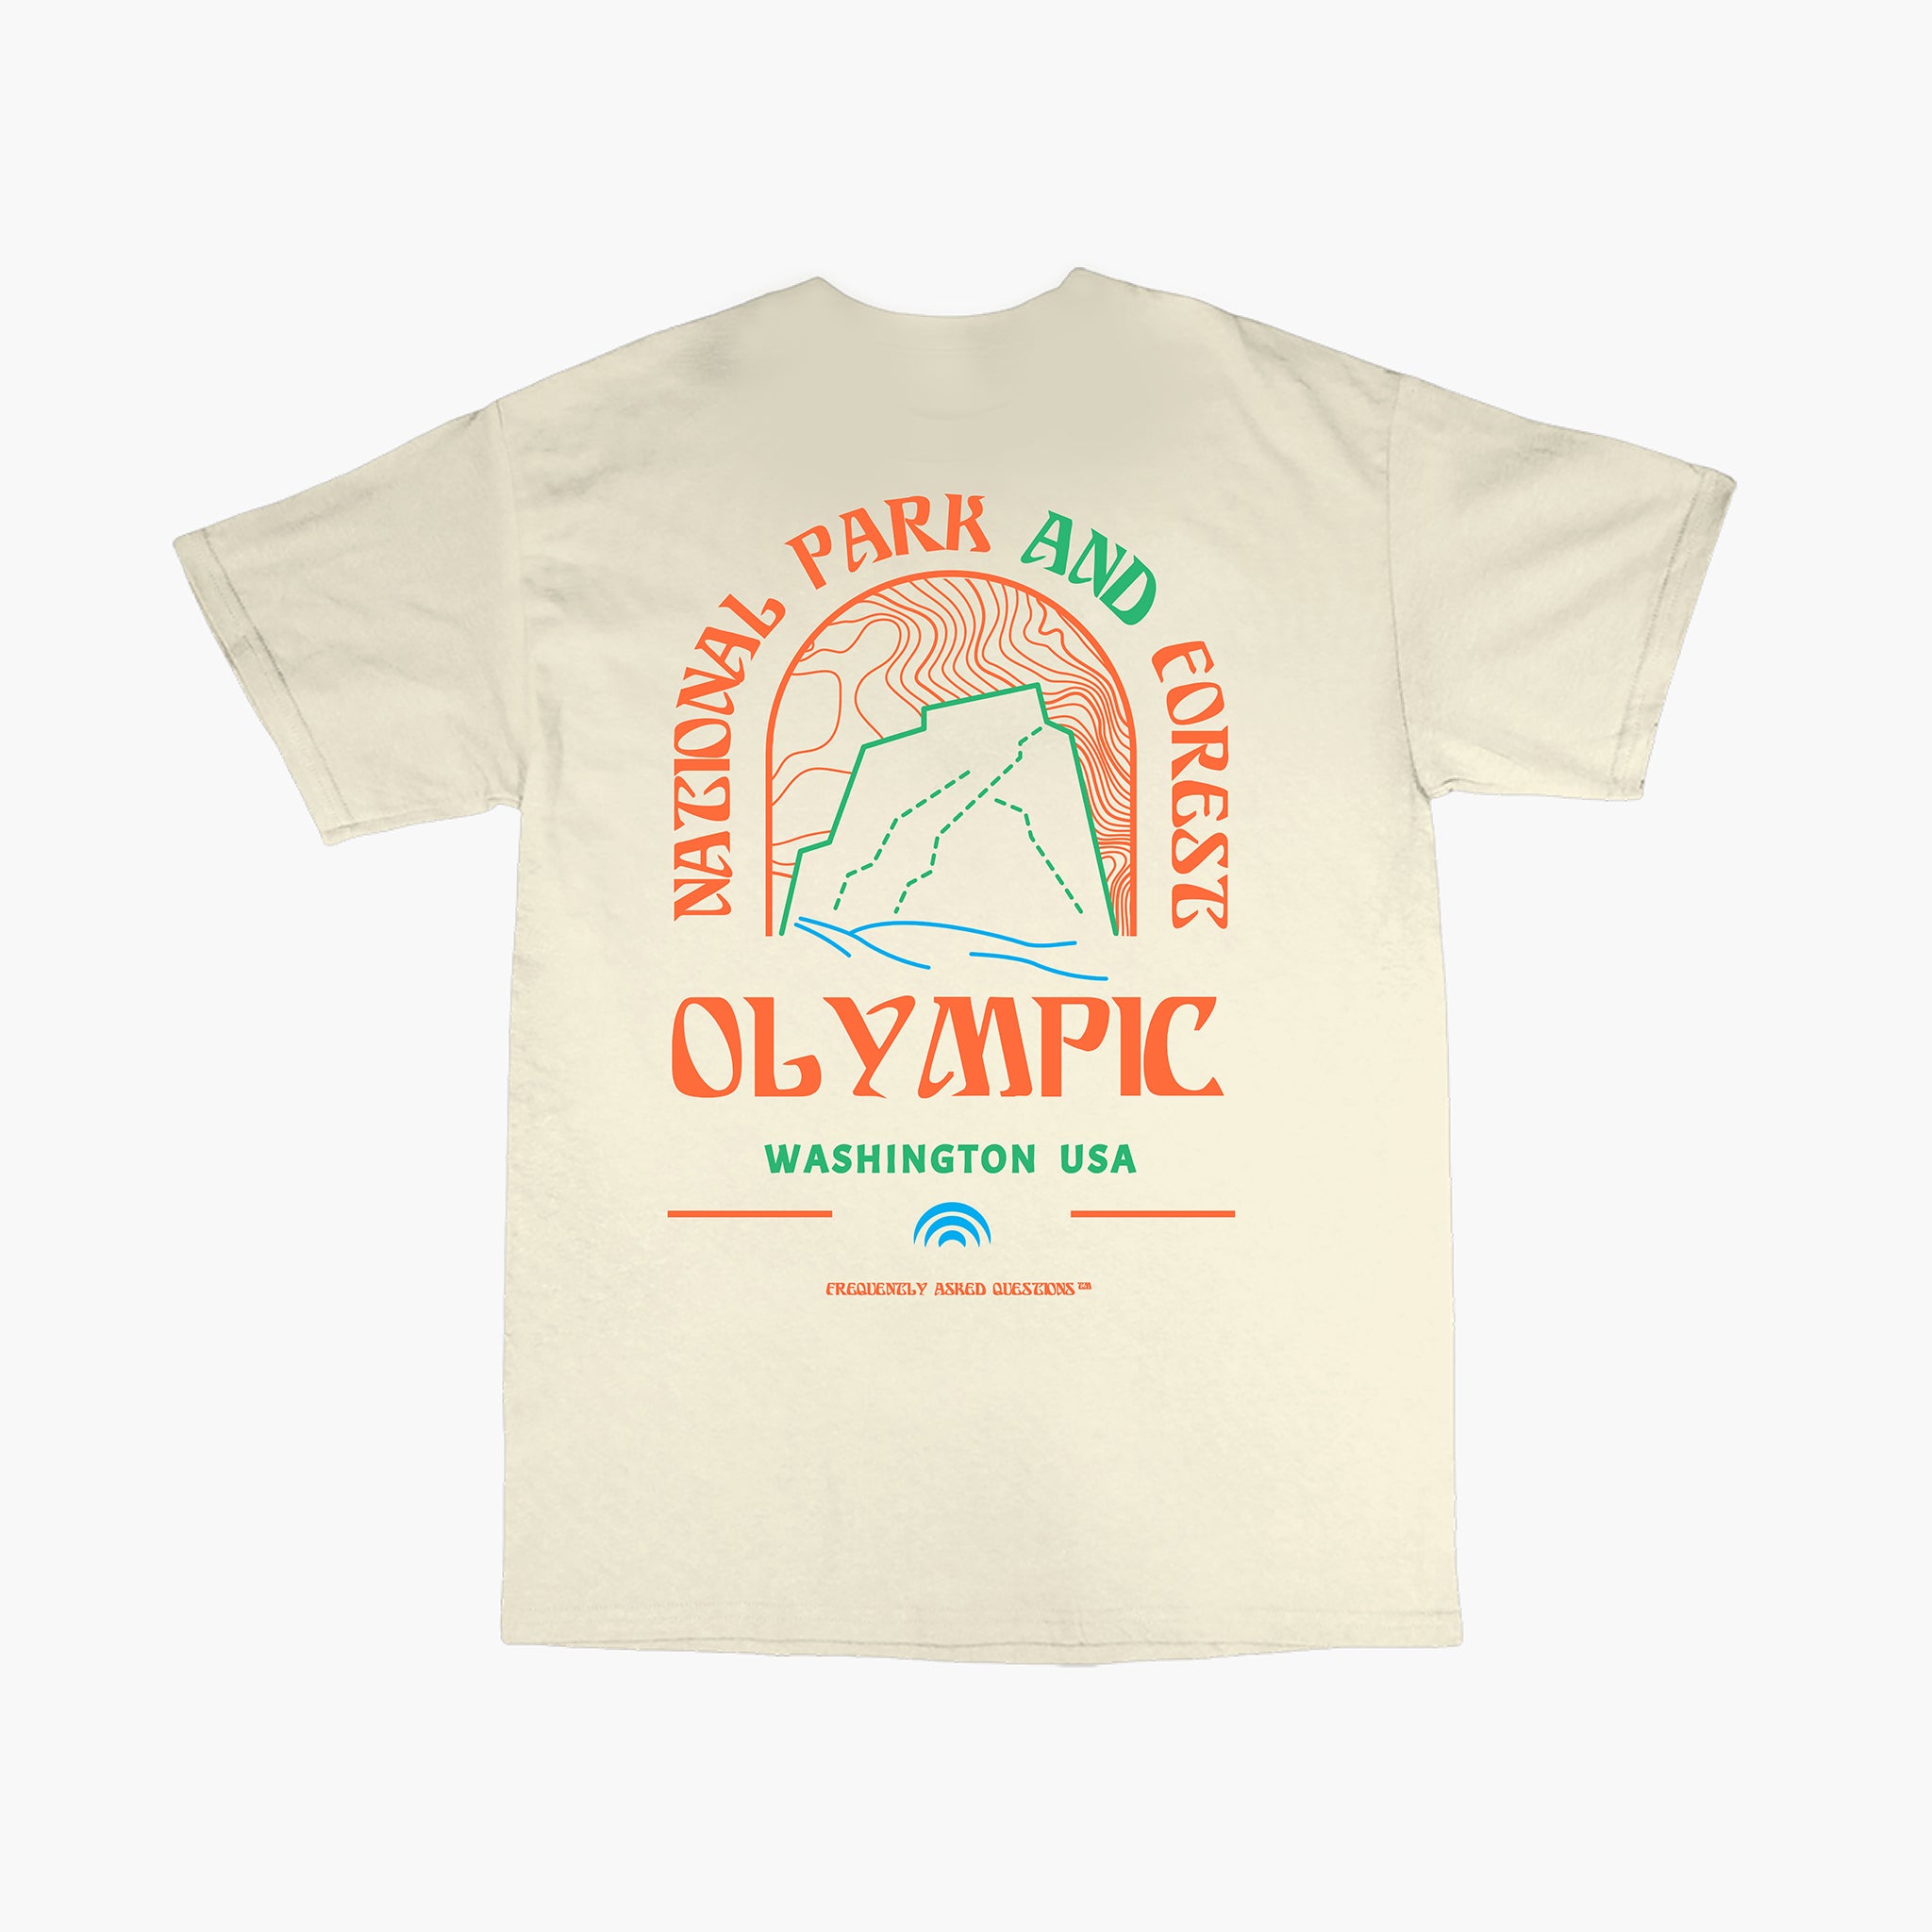 Olympic T-Shirt - Frequently Asked Questions